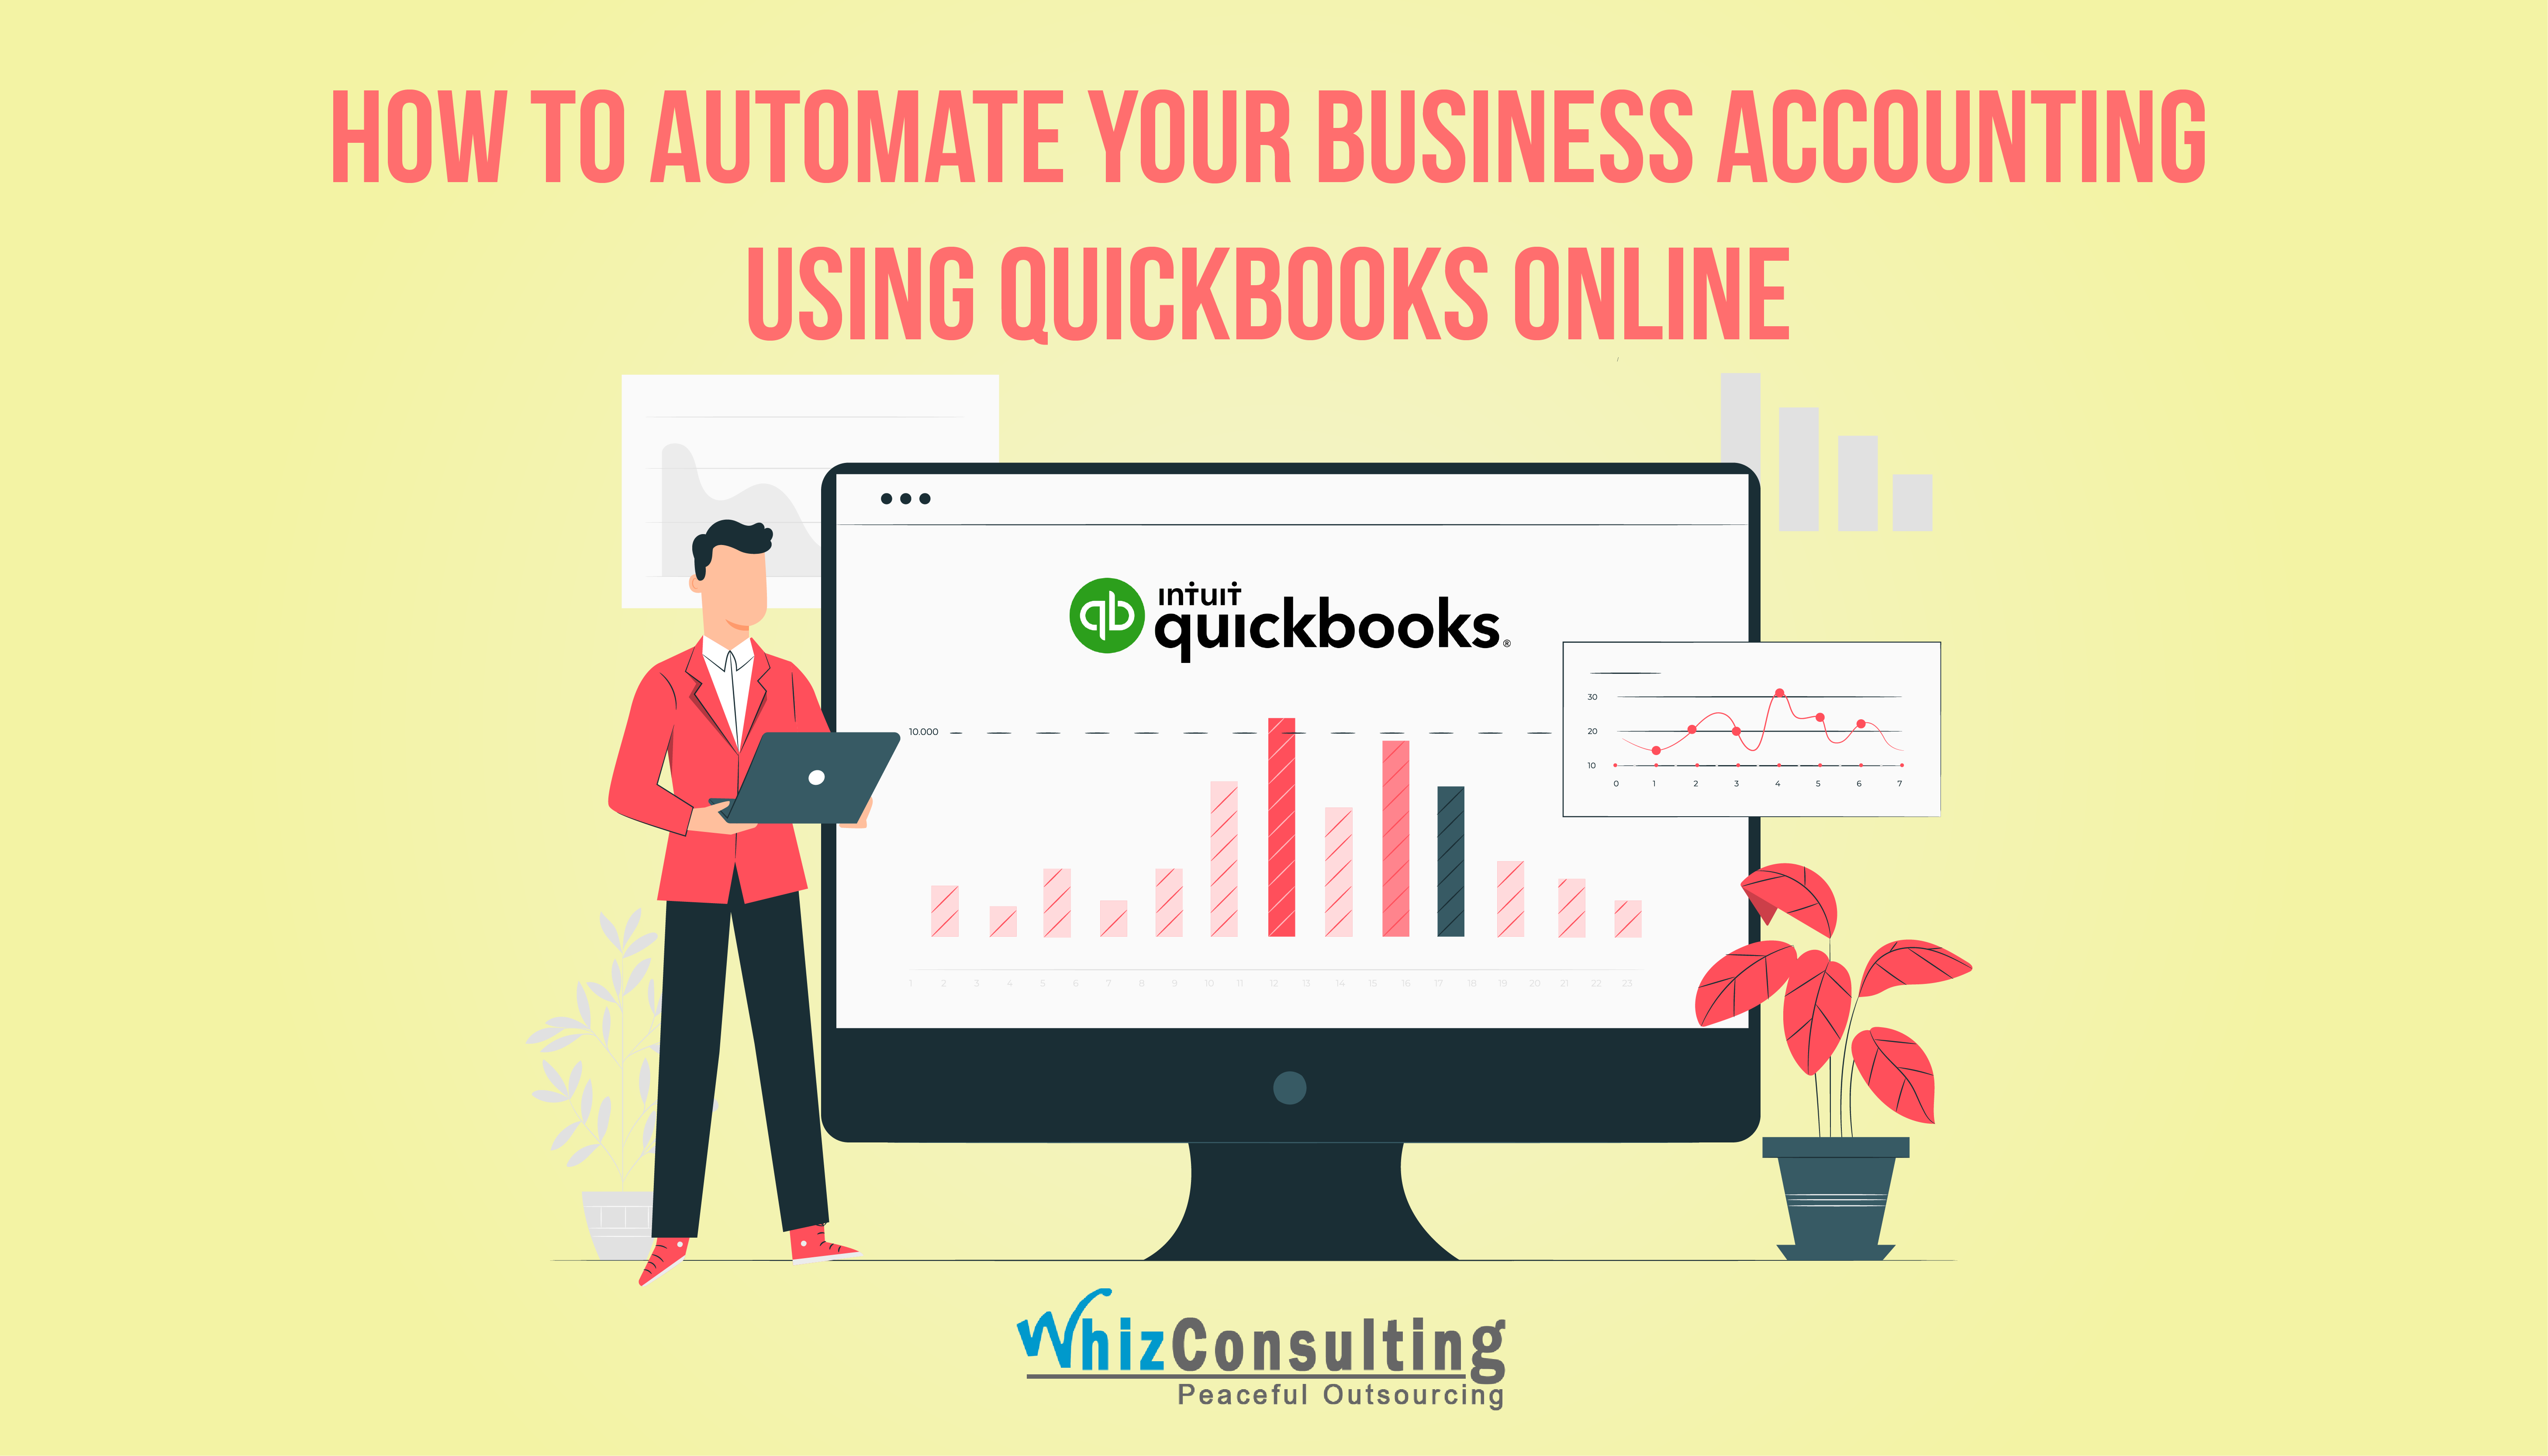 QuickBooks automated accounting